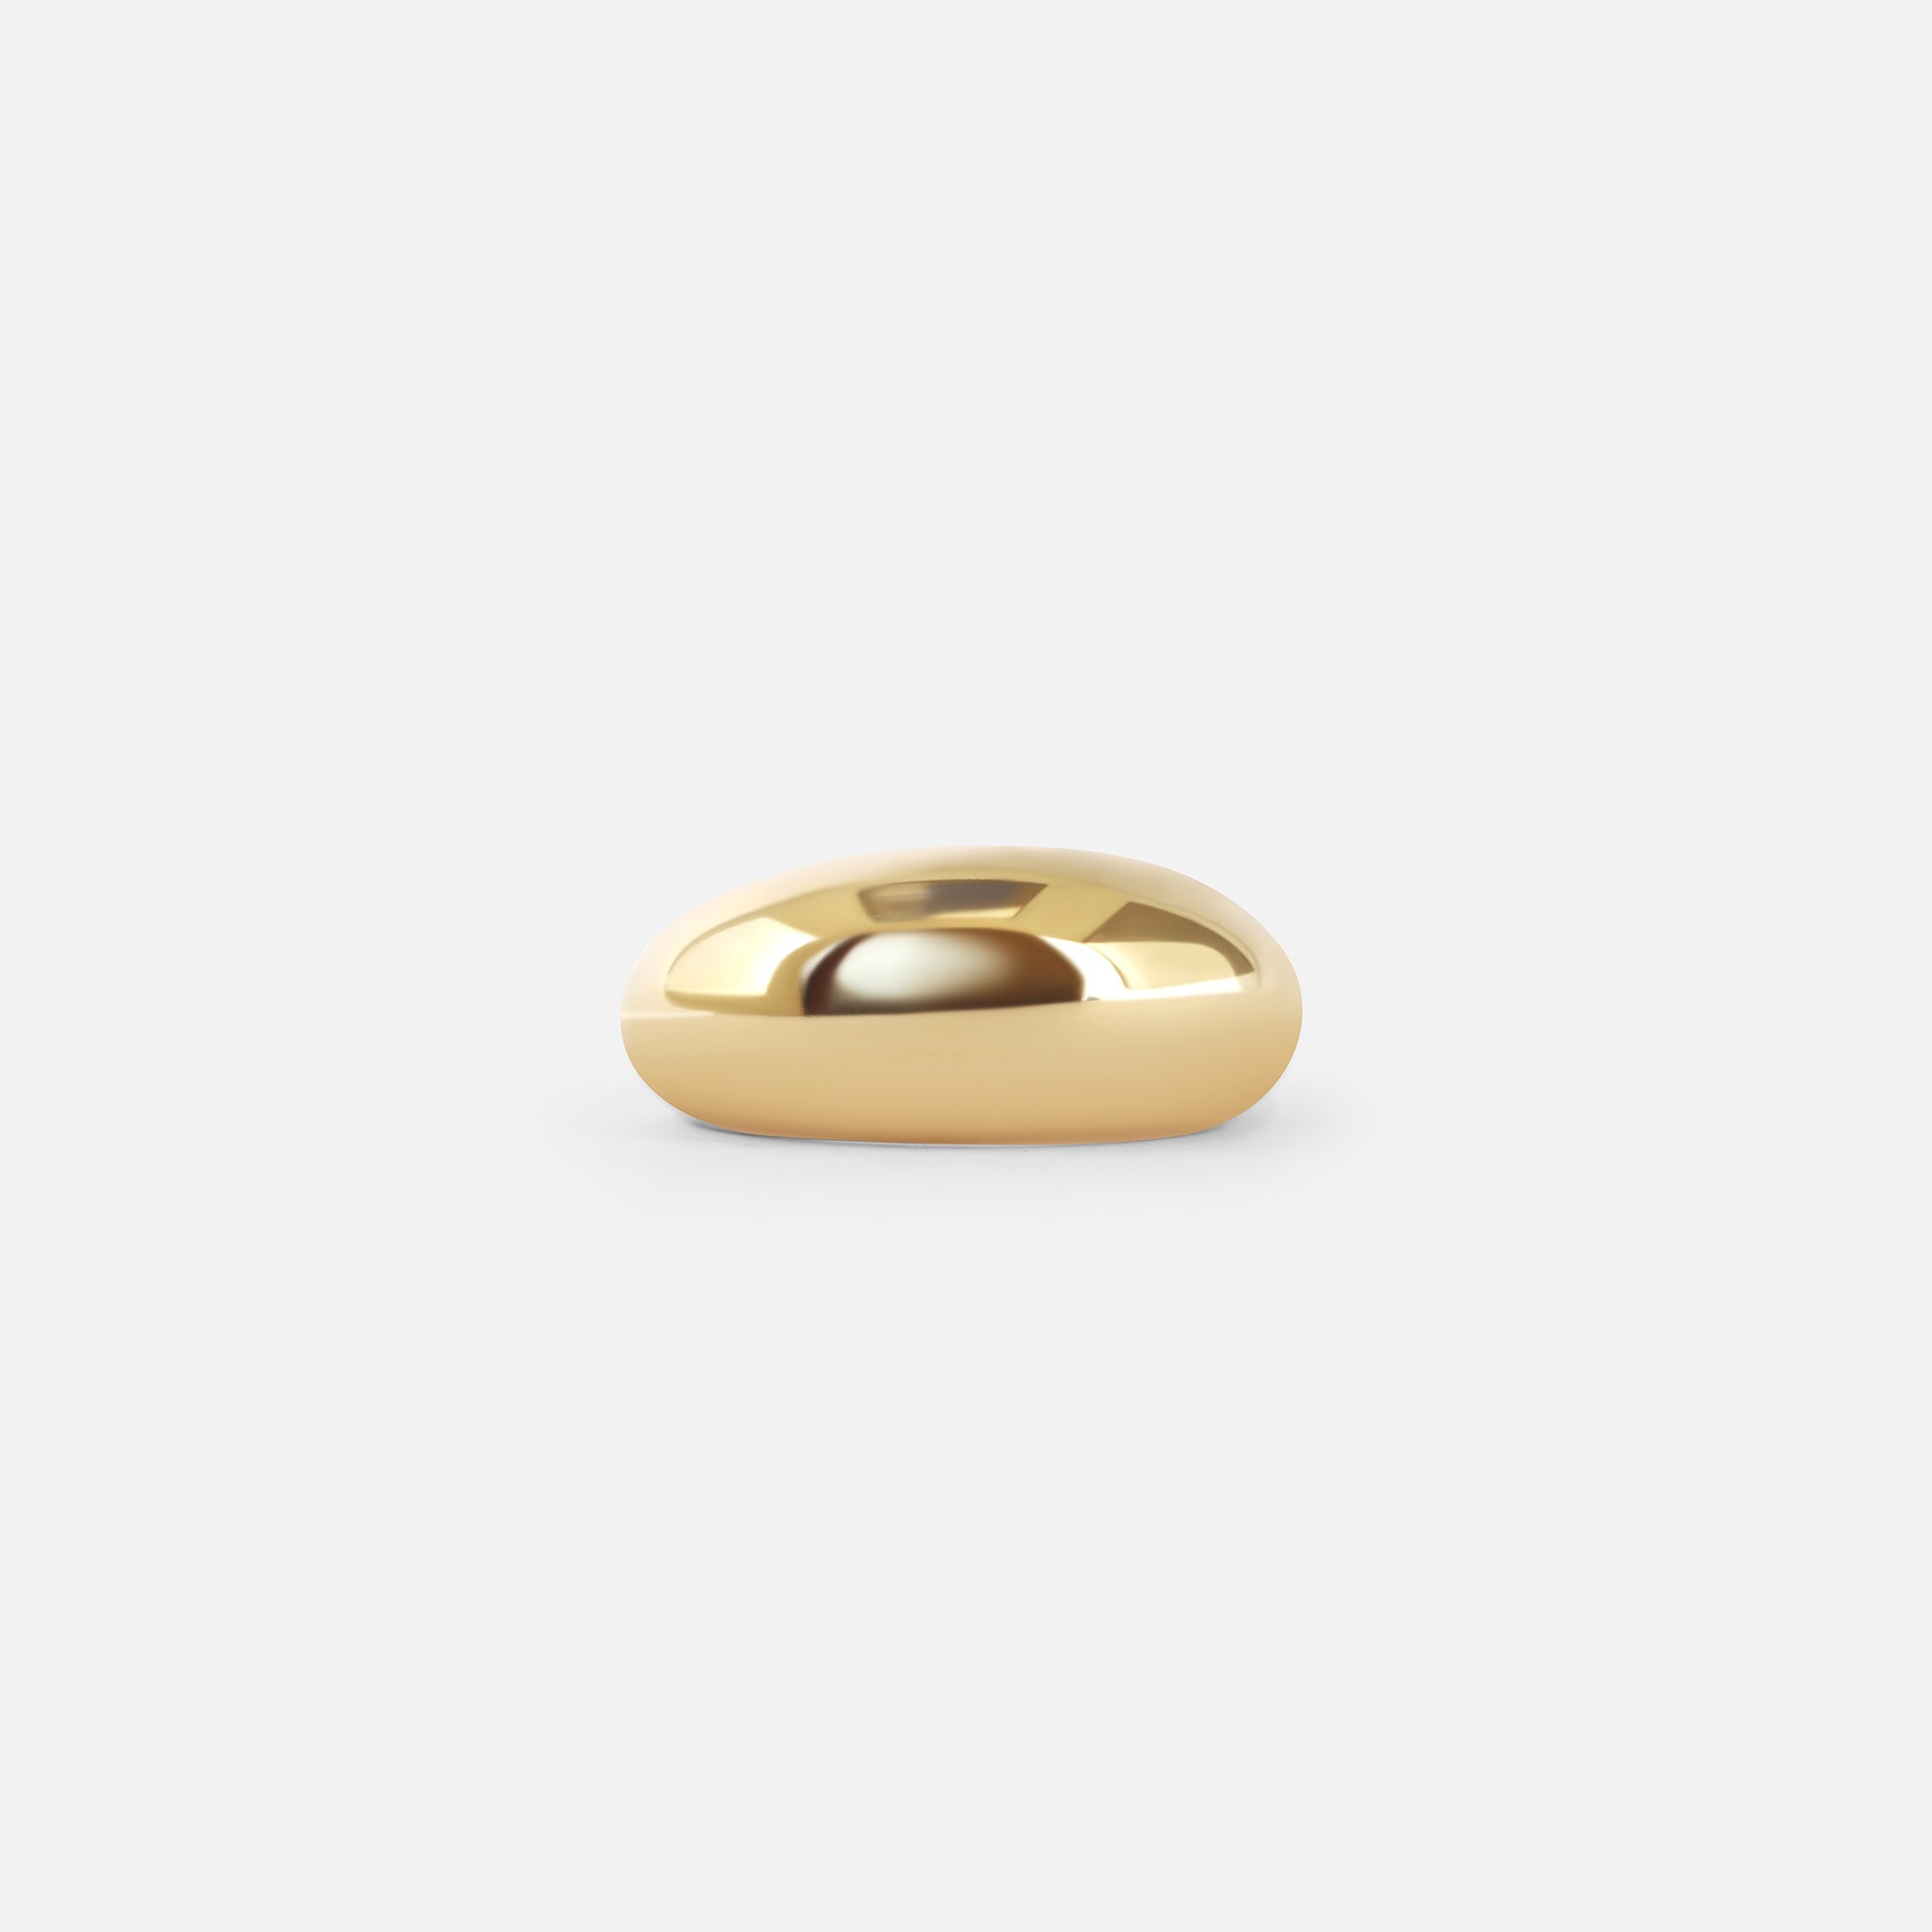 Gold Dome Ring By Bree Altman in Wedding Bands Category